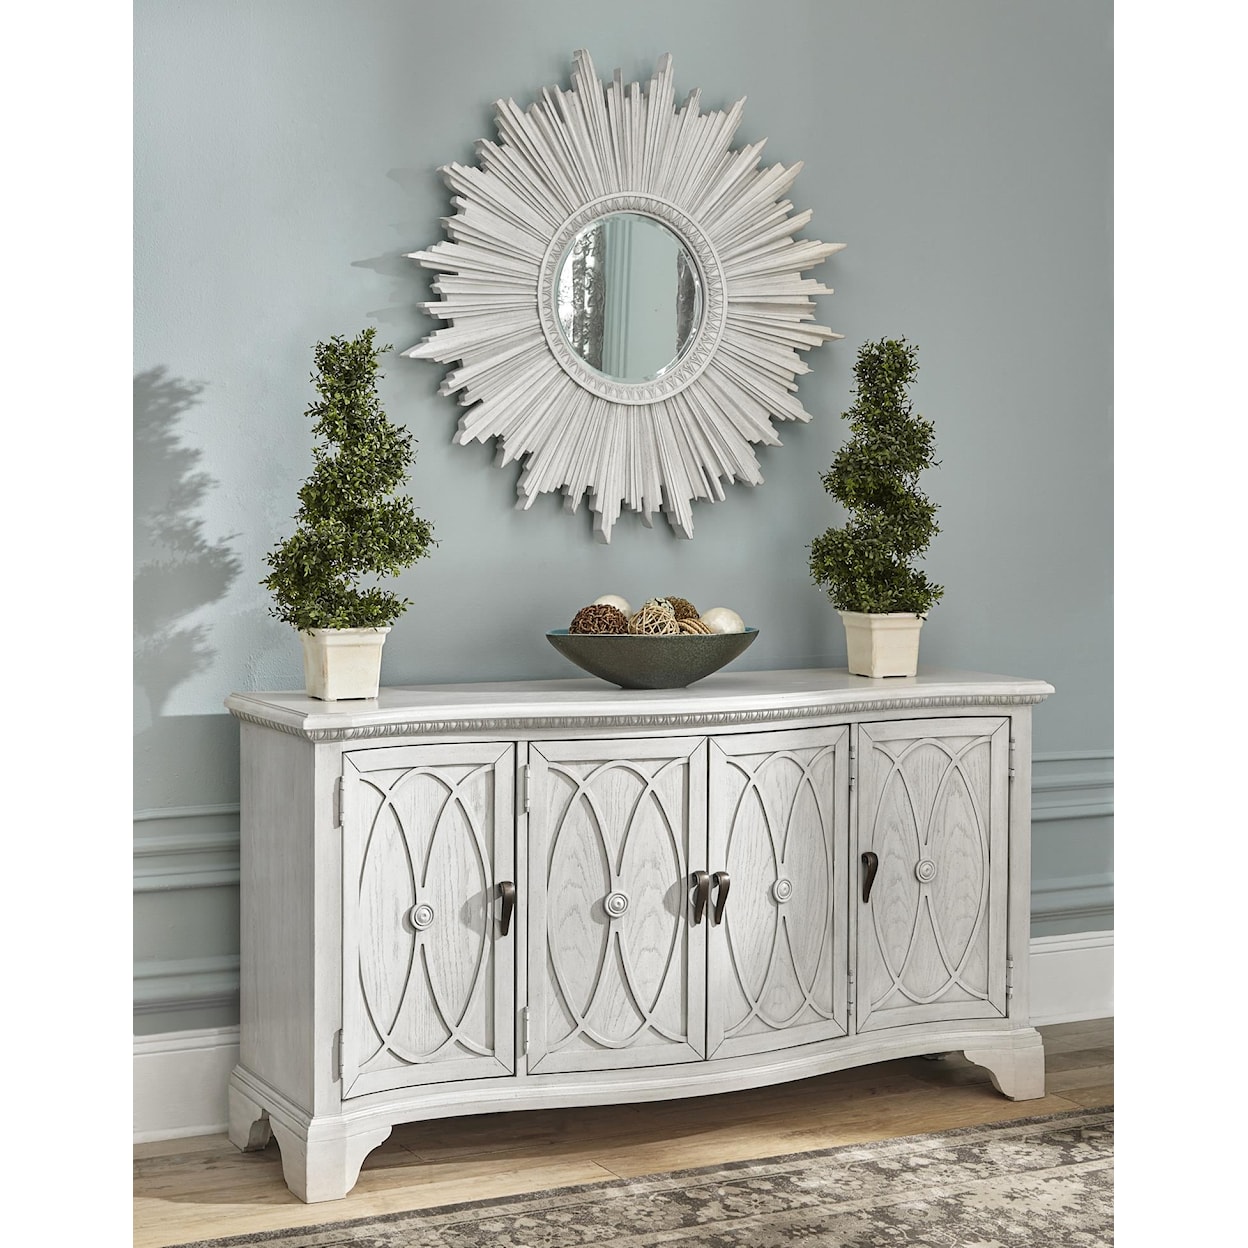 Trisha Yearwood Home Collection by Legacy Classic Jasper County Console